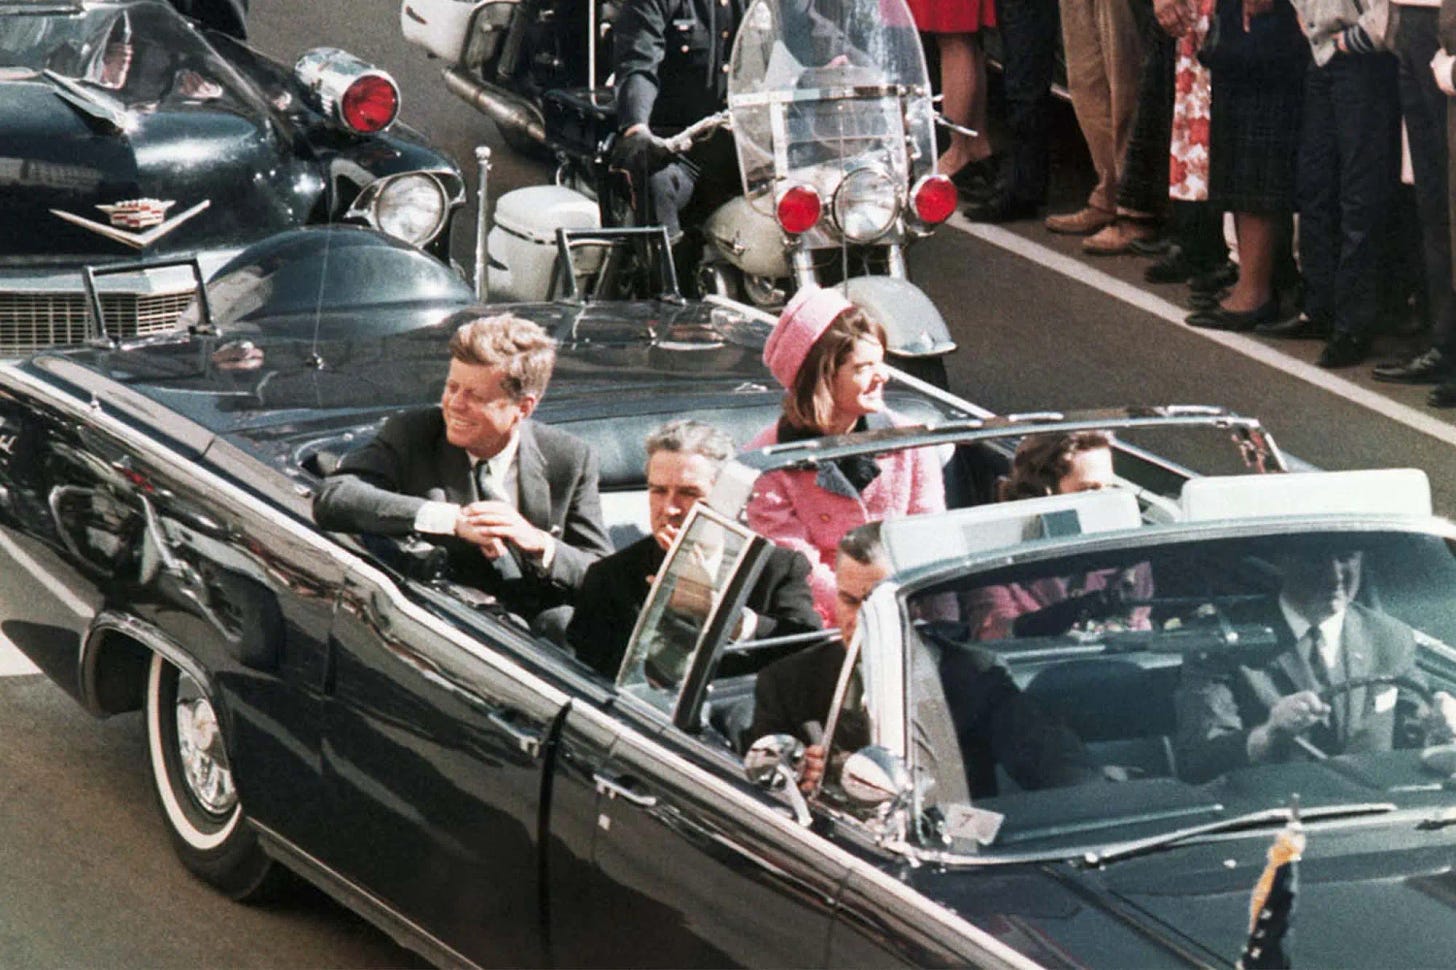 jfk blown away what else do I have to say